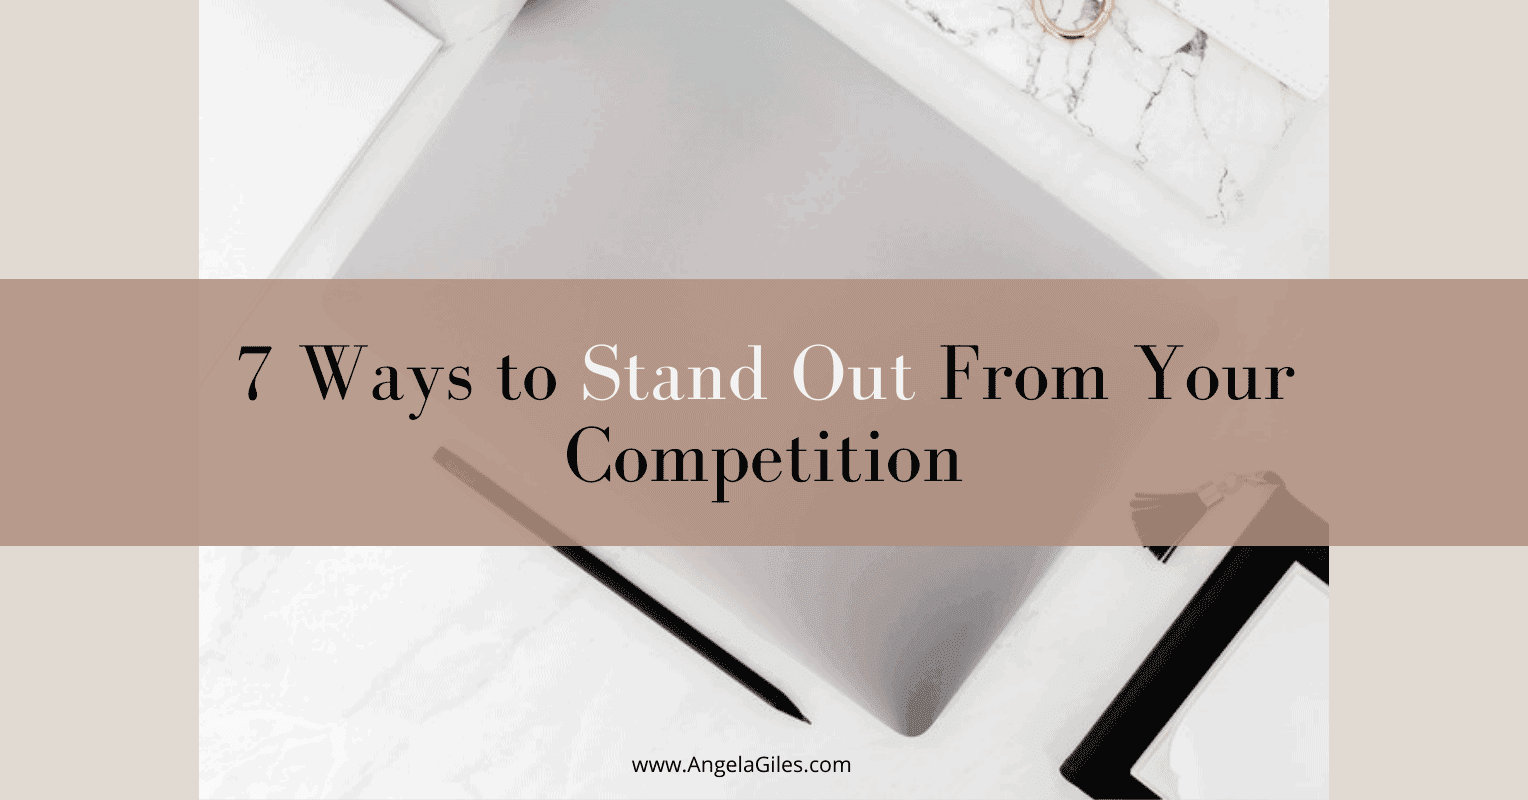 7 Ways to Stand Out From Your Competition